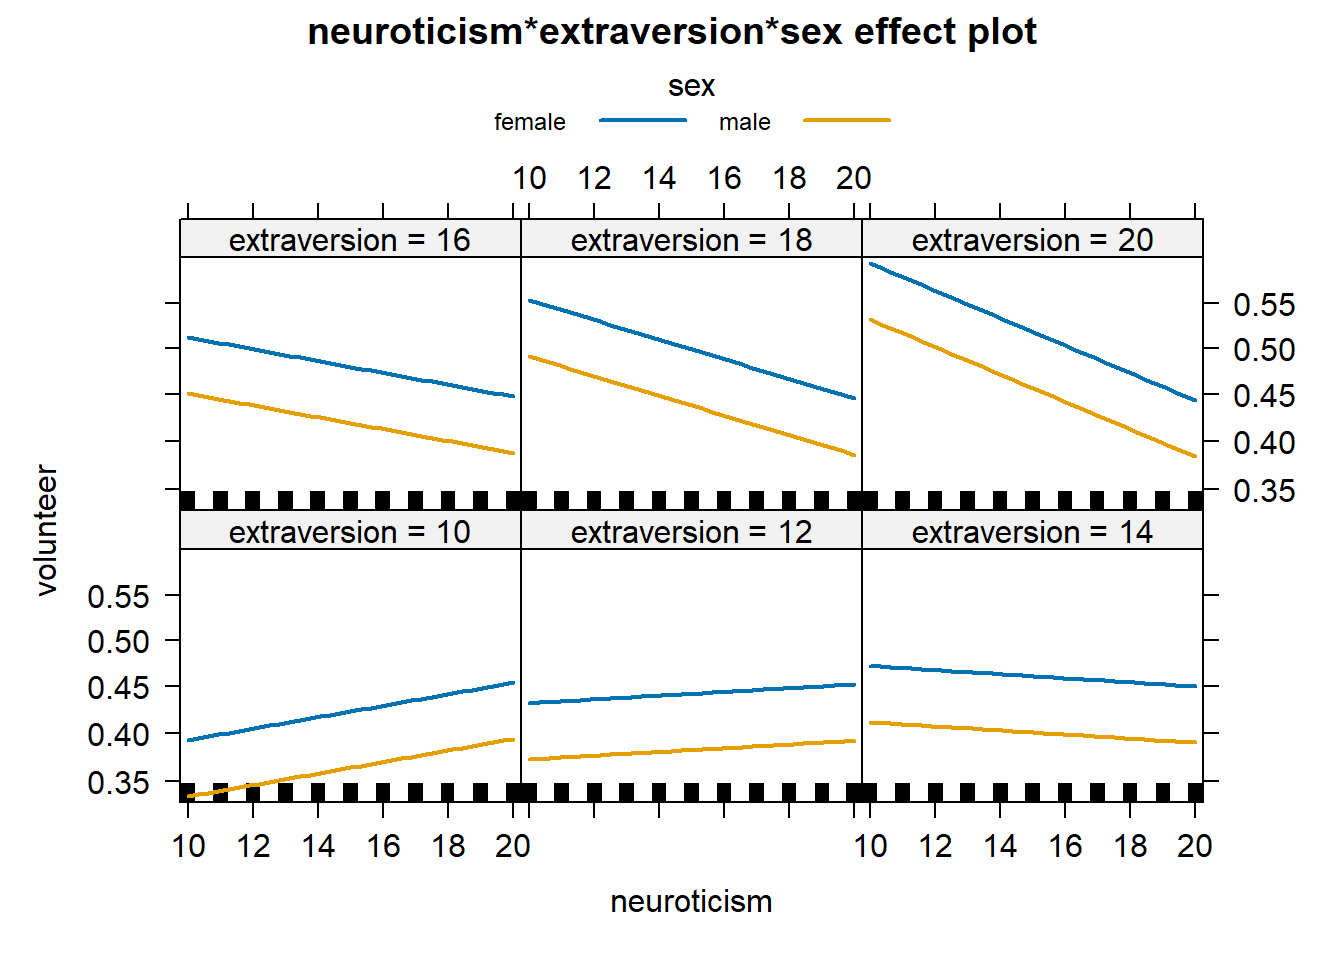 Effect plot showing predicted probability for volunteering for both male and female over the range of plausible neuroticism values conditioned on six different values of extraversion.